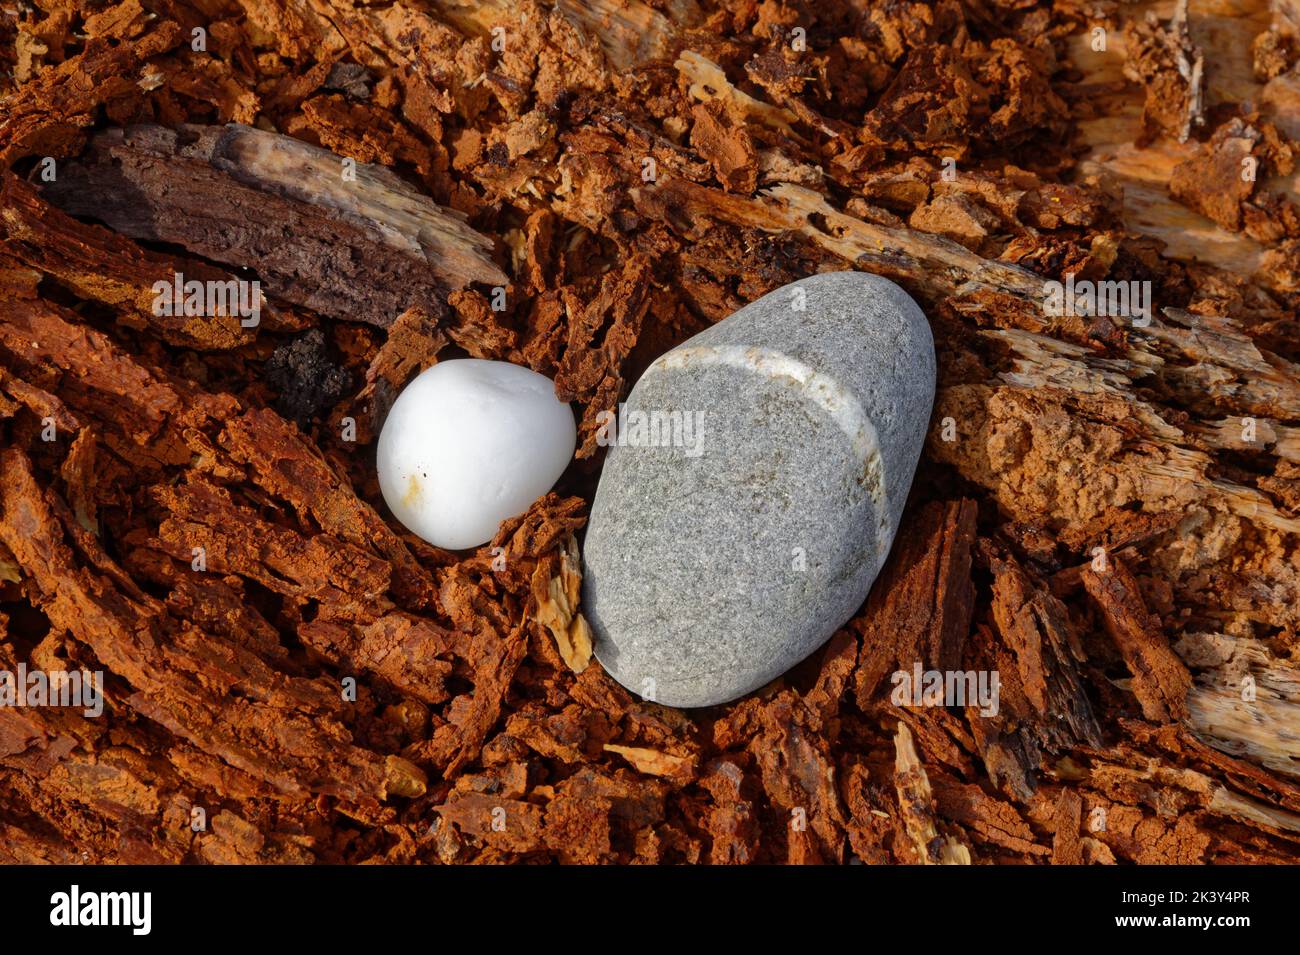 A grey stone has an inclusion in it which is white and goes around the stone, it is next to a white stone on some rotten wood. Stock Photo